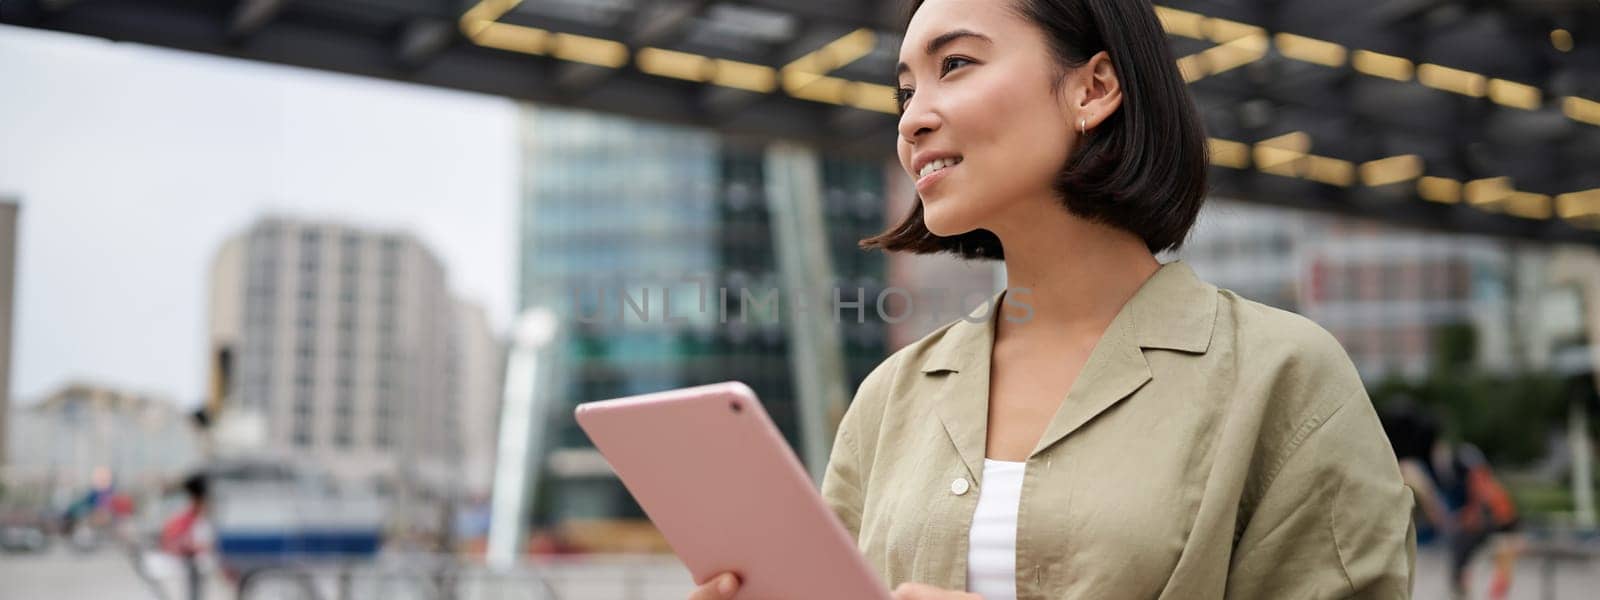 Portrait of asian woman standing on street, using tablet, smiling with carefree face expression, outdoor shot.